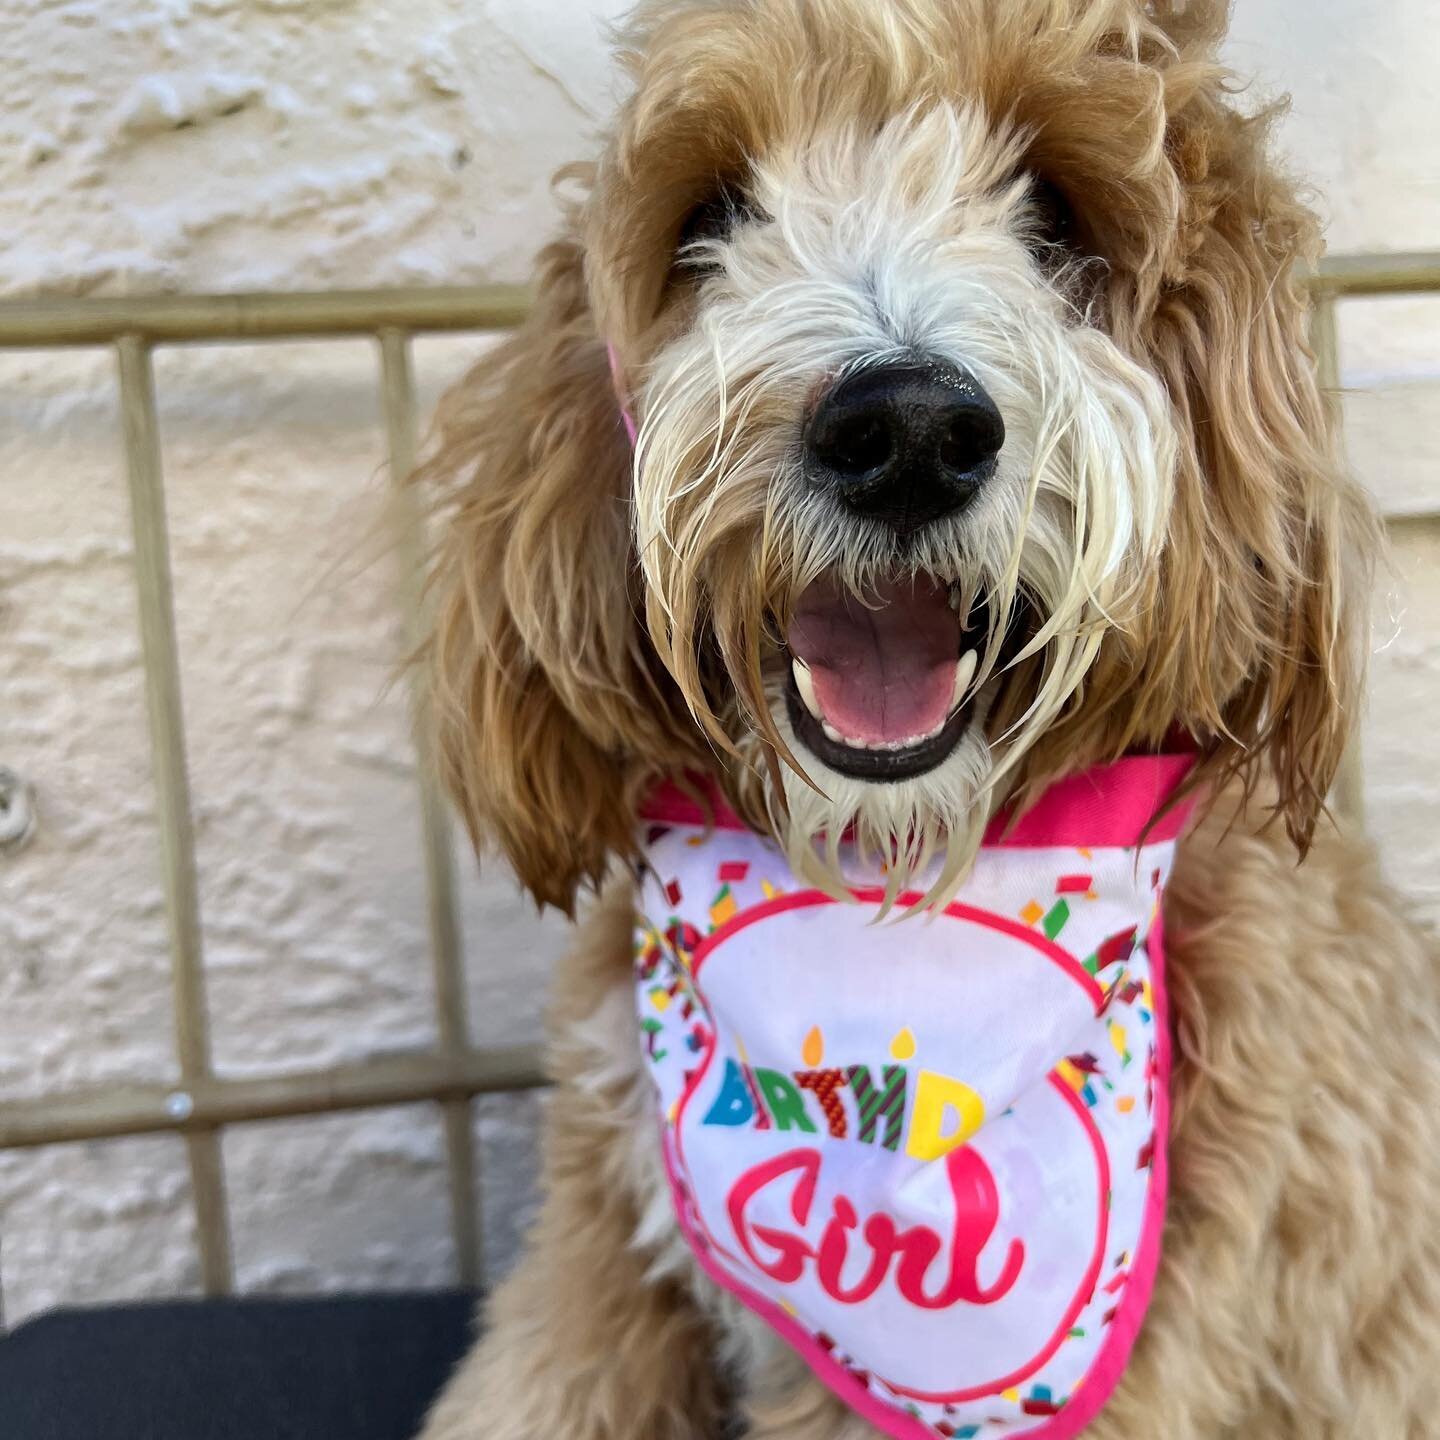 Happy Birthday Sweet Pinot!!!! We loved celebrating YOU with your Pawfect friends 🎉 it&rsquo;s always a PAWTY when you&rsquo;re around 🤣☀️🐶🐾💕😍😇 &bull;
&bull;
&bull;
&bull;
&bull;
#pawfectpalsmiami #pawfectpals #miamidogwalkers #miamipetsitters